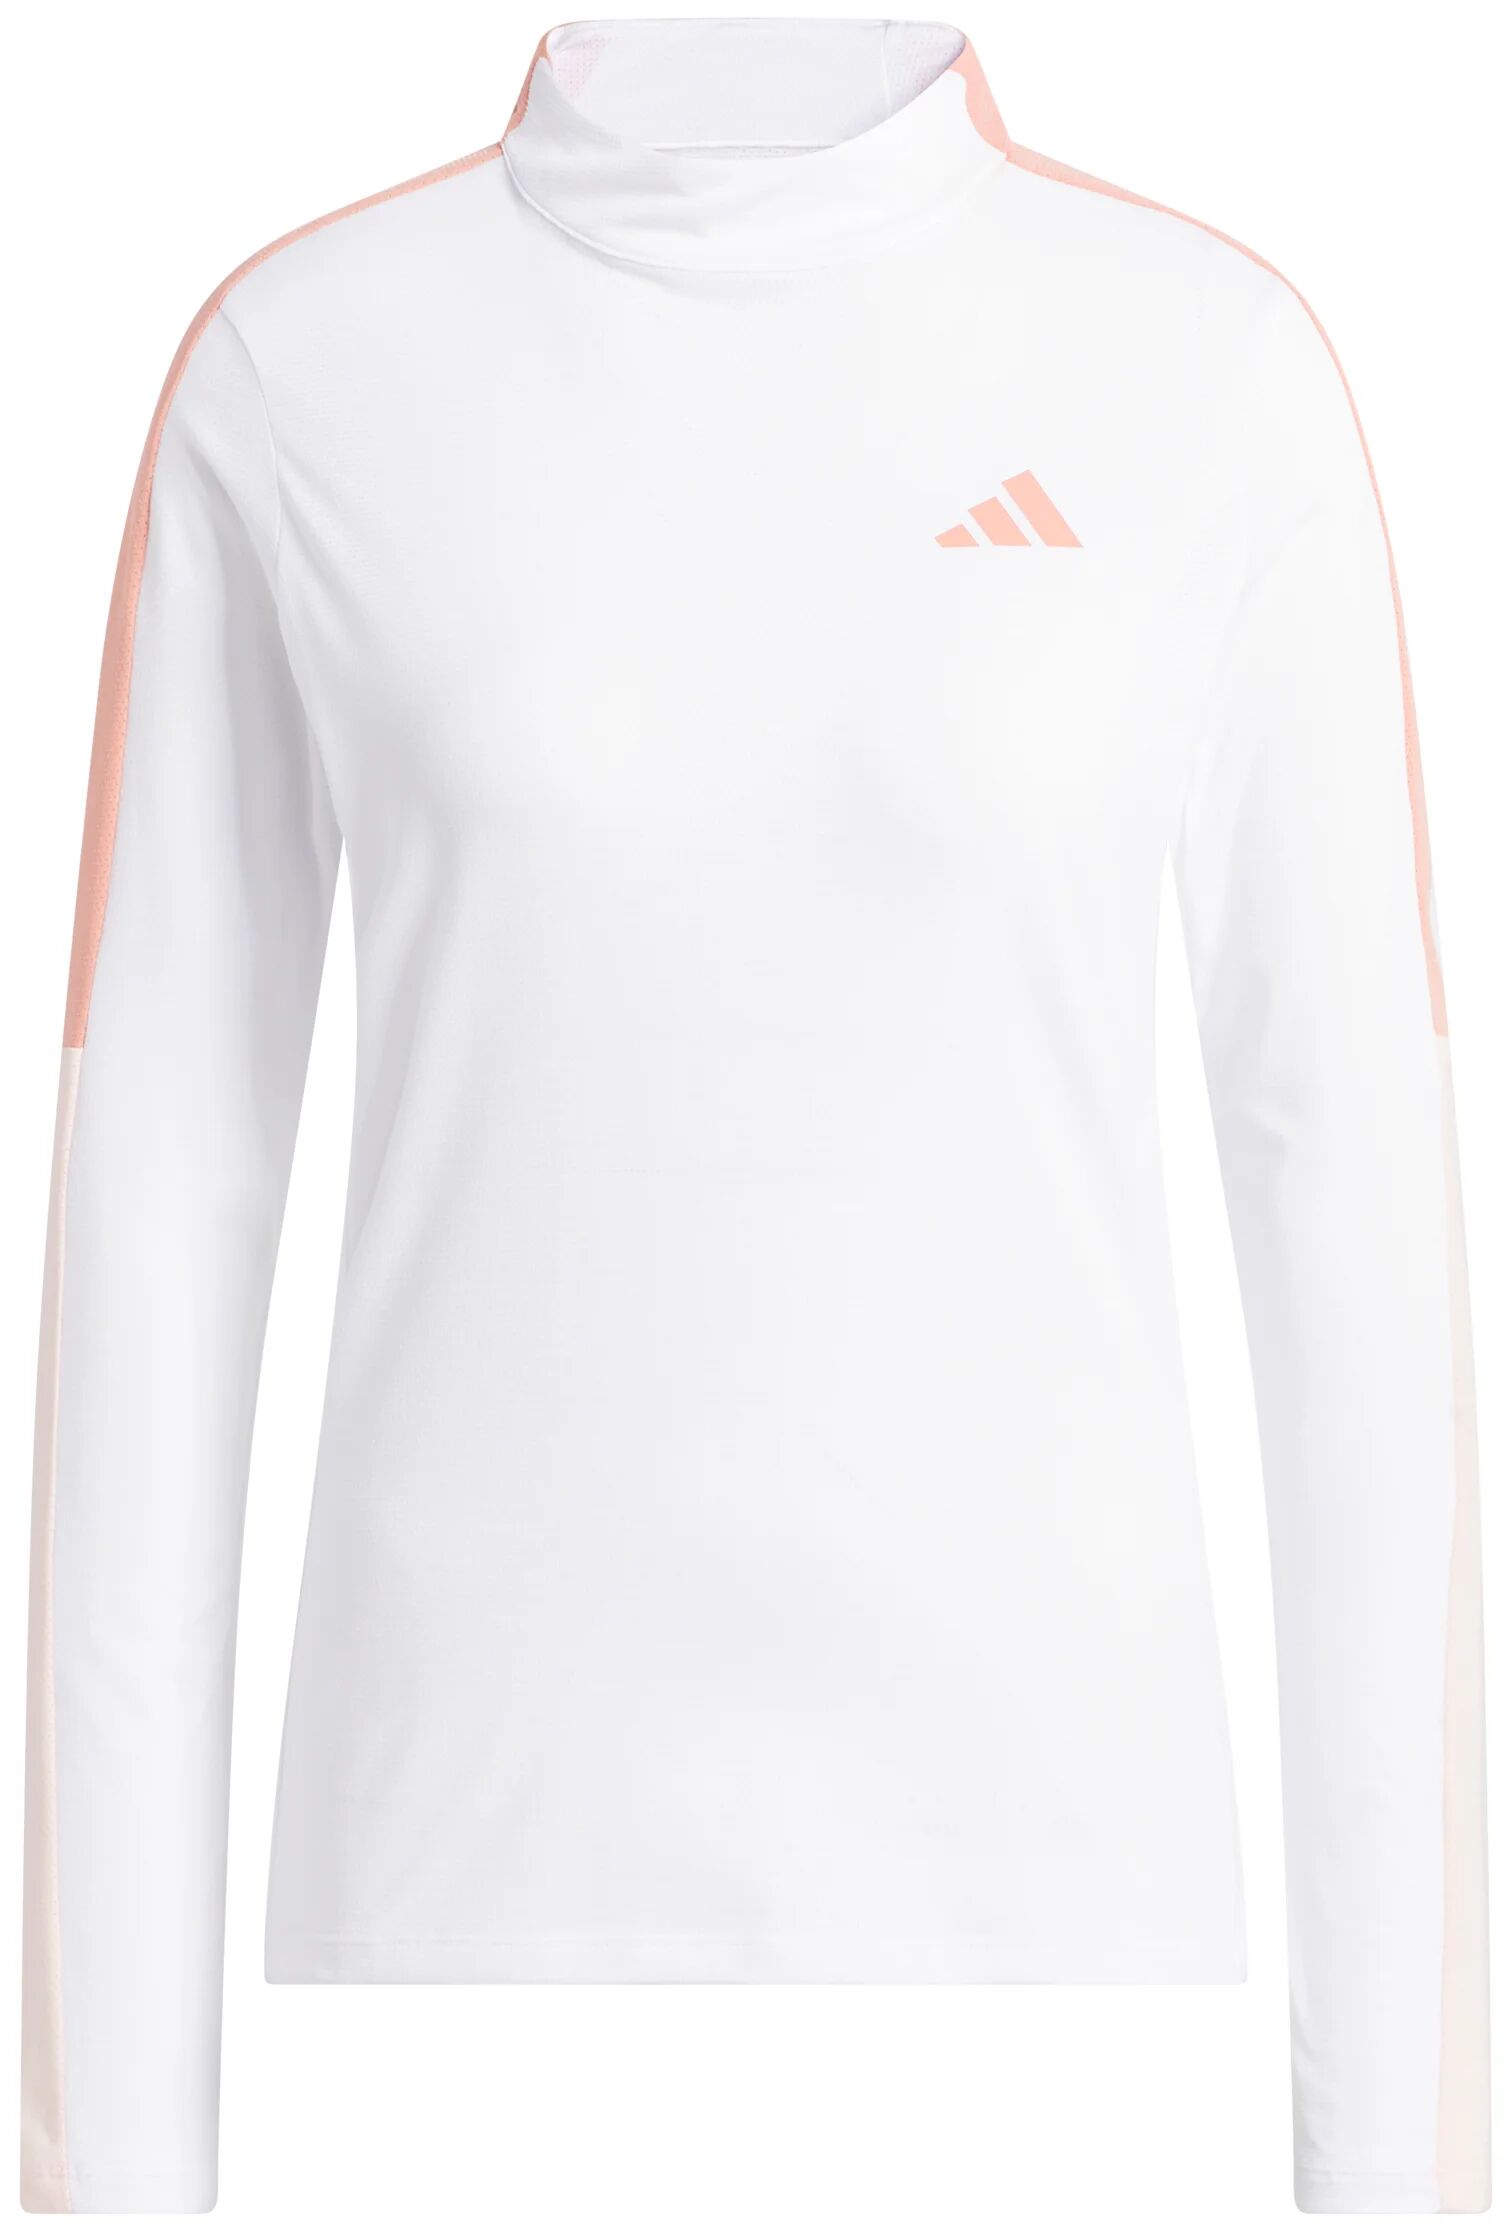 adidas Womens Made With Nature Mock Neck Long Sleeve Golf T-Shirt - White, Size: Large